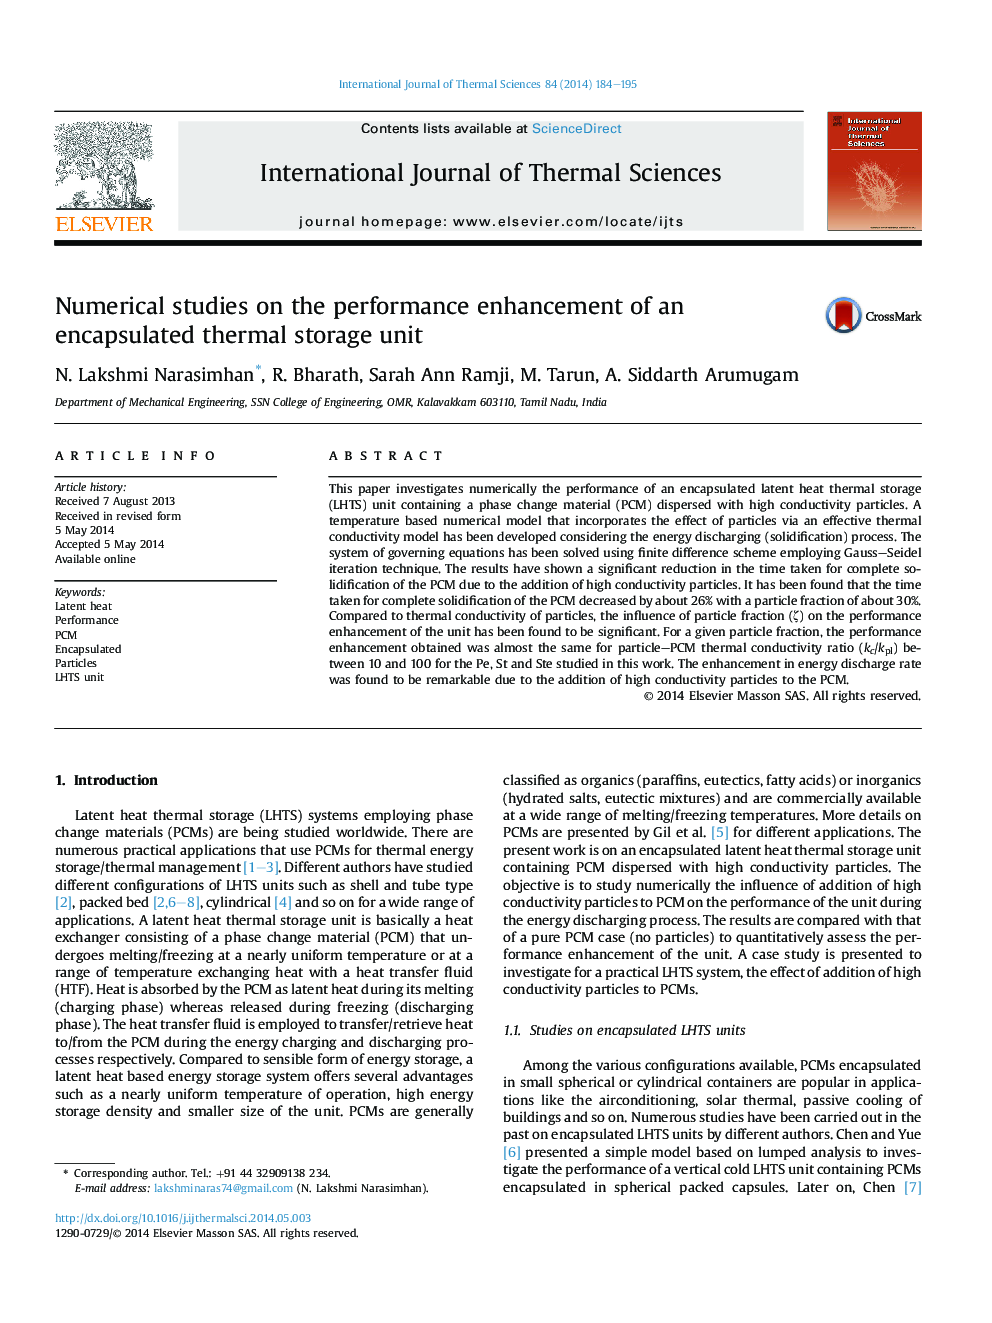 Numerical studies on the performance enhancement of an encapsulated thermal storage unit